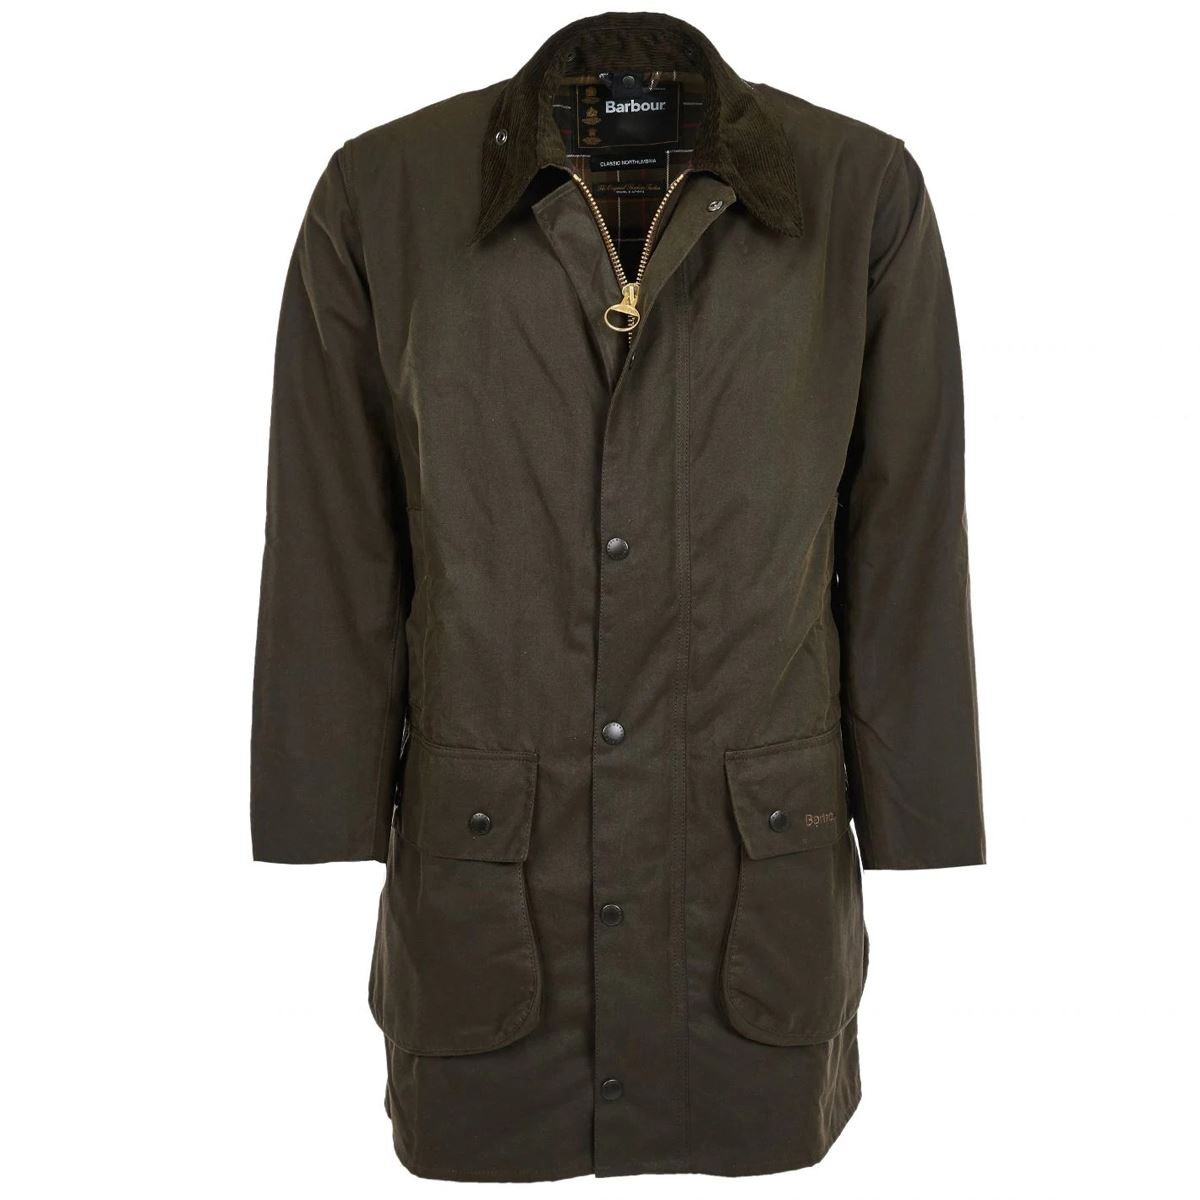 Is the Barbour Northumbria jacket water-resistant?